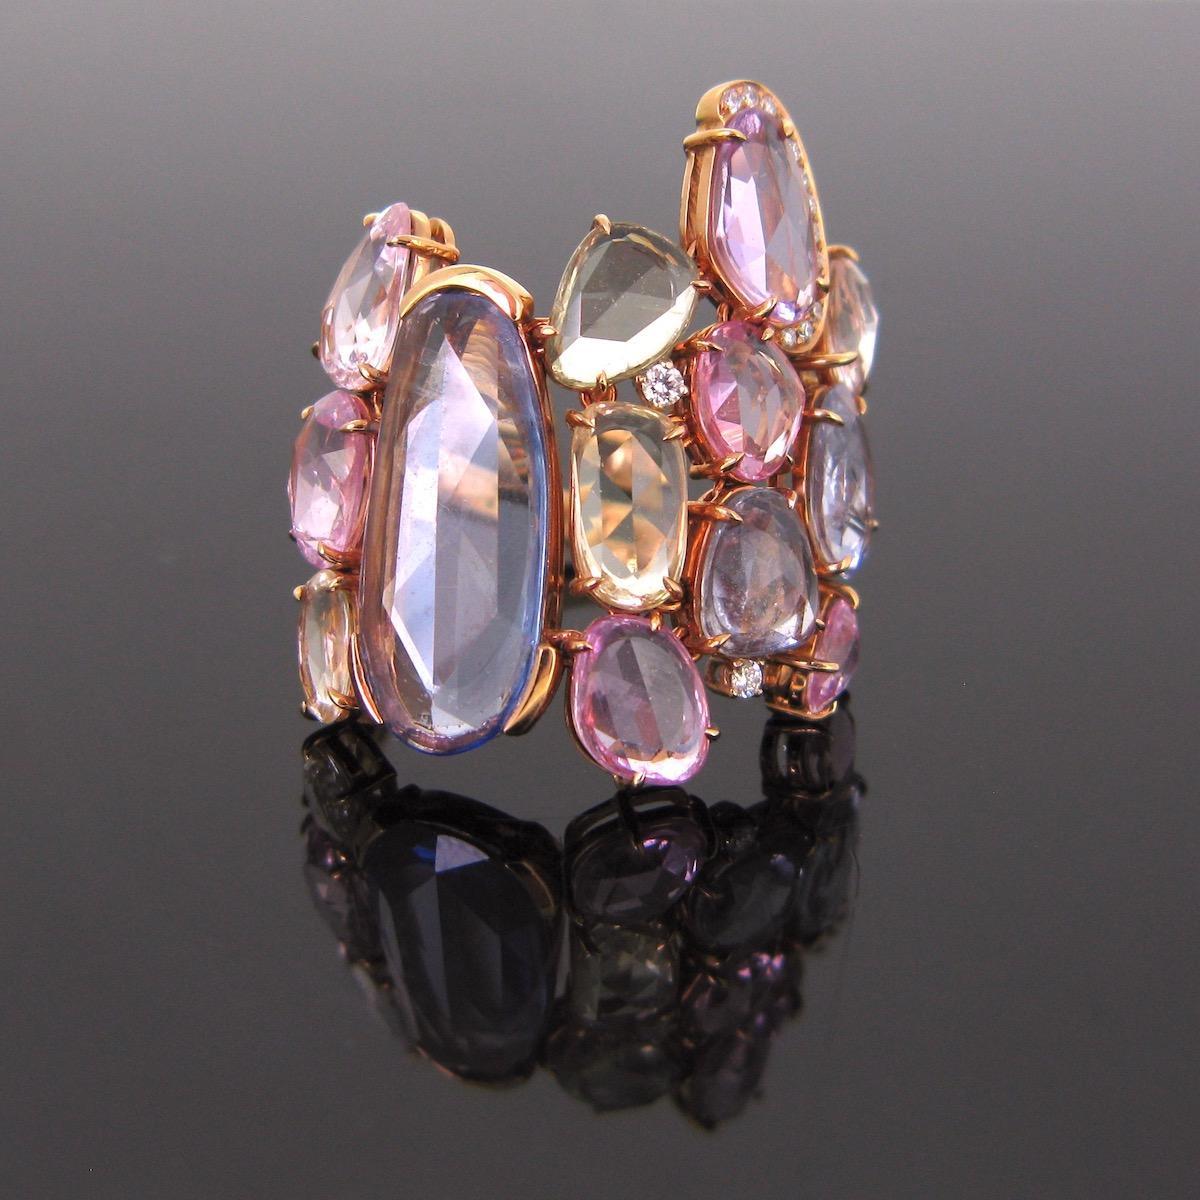 Weight : 10 gr

Stones : colored sapphires and diamonds

Metal : 18kt gold

Period : Modern

Condition : New

Hallmarks : UK / 750

A unique Colored sapphires and diamonds ring. This one has a unique design. It is adorned with rose cut colored